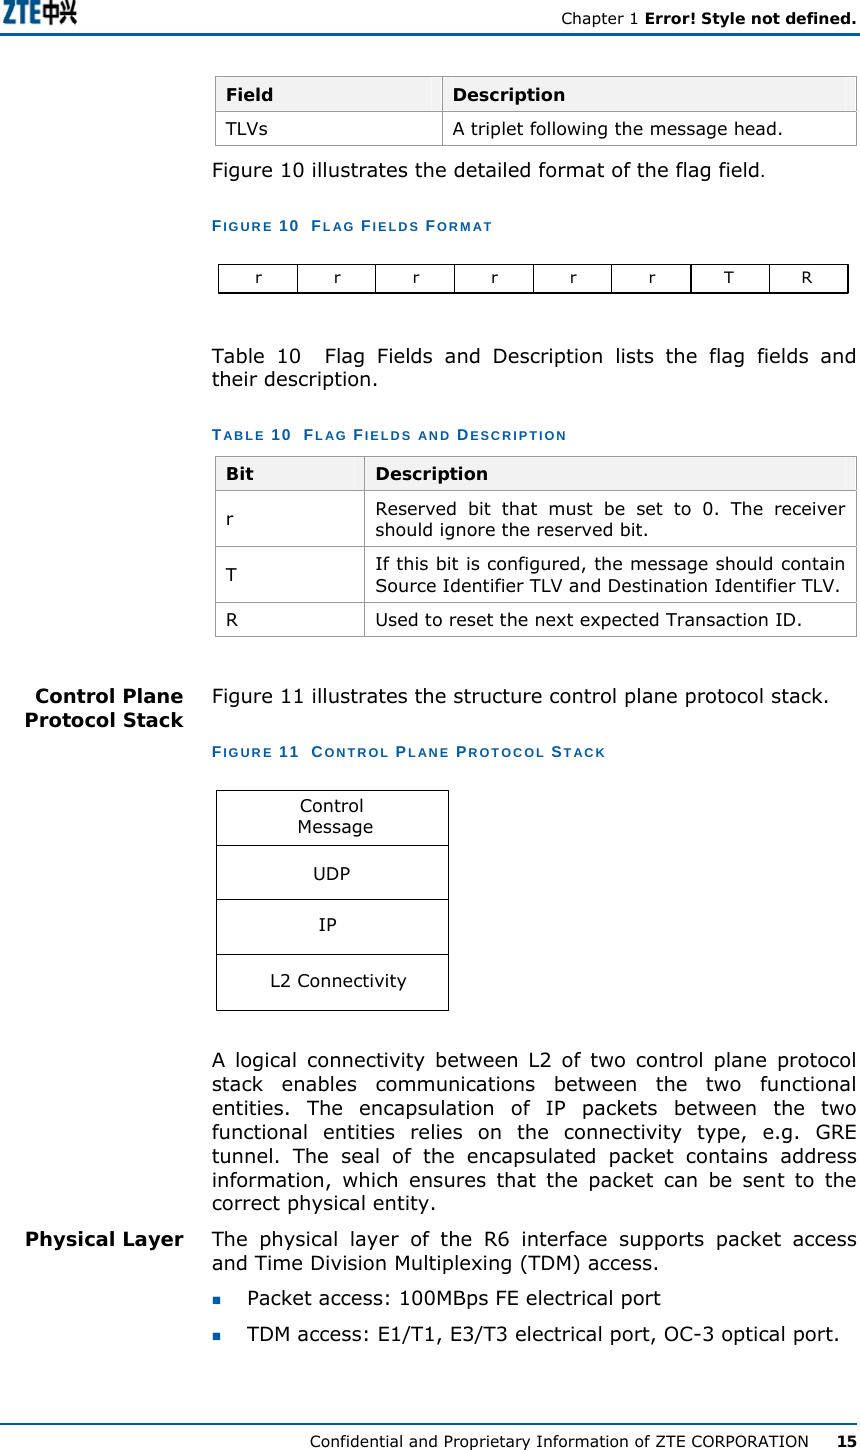   Chapter 1 Error! Style not defined.  Confidential and Proprietary Information of ZTE CORPORATION      15 Field   Description TLVs  A triplet following the message head.   Figure 10 illustrates the detailed format of the flag field. FIGURE 10  FLAG FIELDS FORMAT Trrrrrr R Table 10  Flag Fields and Description lists the flag fields and their description. TABLE 10  FLAG FIELDS AND DESCRIPTION  Bit  Description r  Reserved bit that must be set to 0. The receiver should ignore the reserved bit.  T  If this bit is configured, the message should contain Source Identifier TLV and Destination Identifier TLV.  R  Used to reset the next expected Transaction ID.   Figure 11 illustrates the structure control plane protocol stack. FIGURE 11  CONTROL PLANE PROTOCOL STACK IPUDPControl MessageL2 Connectivity A logical connectivity between L2 of two control plane protocol stack enables communications between the two functional entities. The encapsulation of IP packets between the two functional entities relies on the connectivity type, e.g. GRE tunnel. The seal of the encapsulated packet contains address information, which ensures that the packet can be sent to the correct physical entity. The physical layer of the R6 interface supports packet access and Time Division Multiplexing (TDM) access.   Packet access: 100MBps FE electrical port  TDM access: E1/T1, E3/T3 electrical port, OC-3 optical port. Control Plane Protocol Stack Physical Layer 